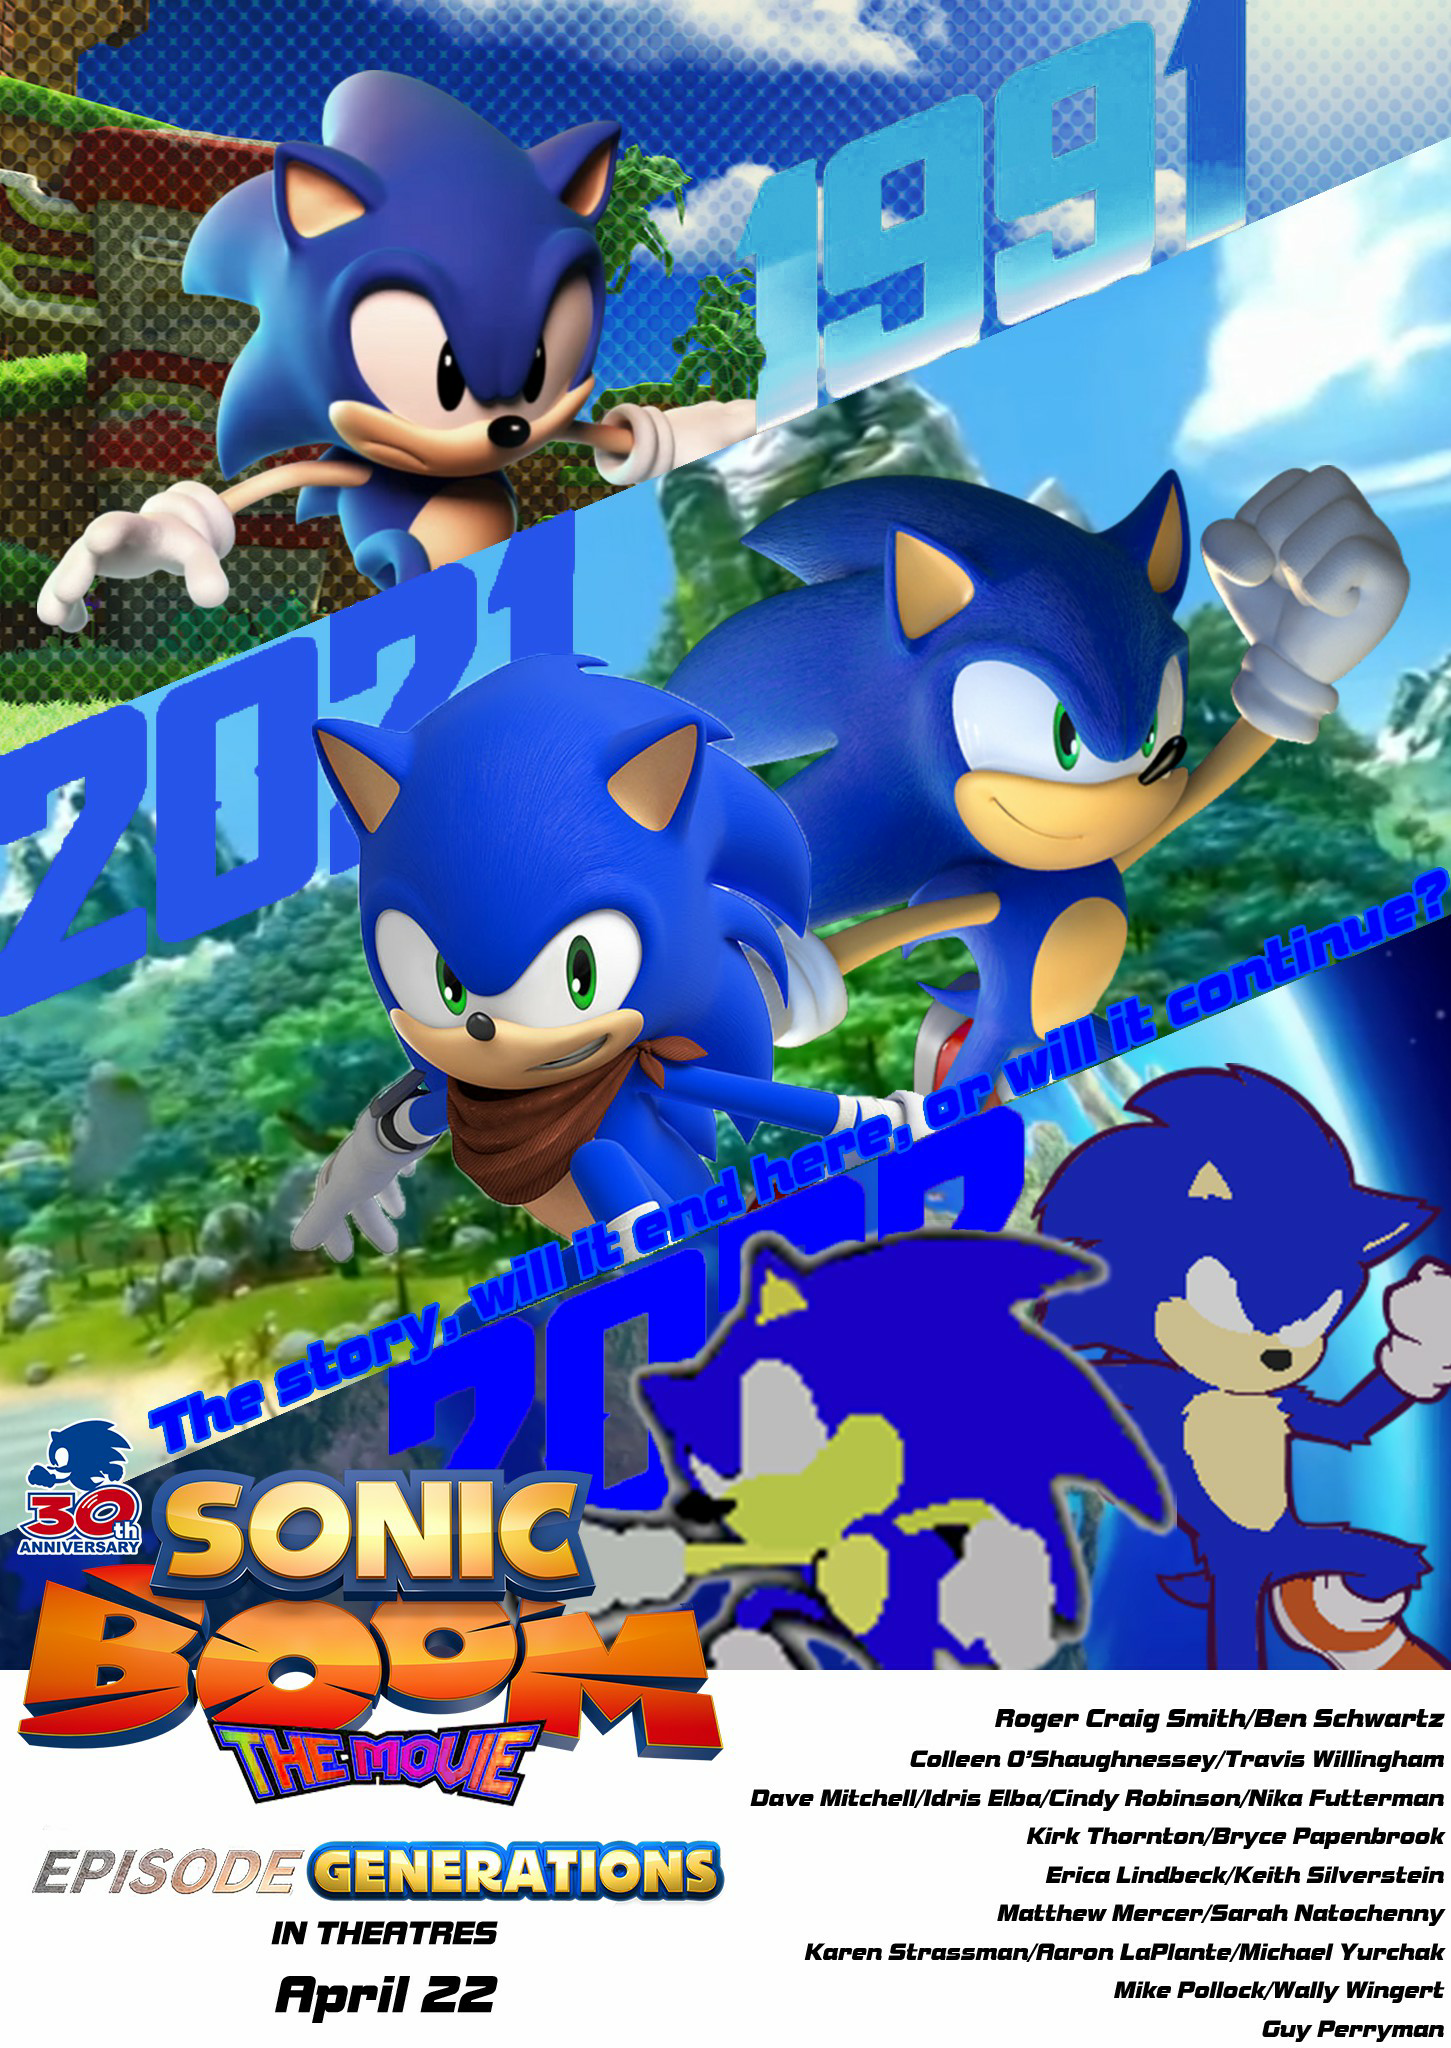 Is Sonic Boom (the series) equivalent to Sonic X (in terms of the  storyline)? And what about the new Sonic Prime? - Quora